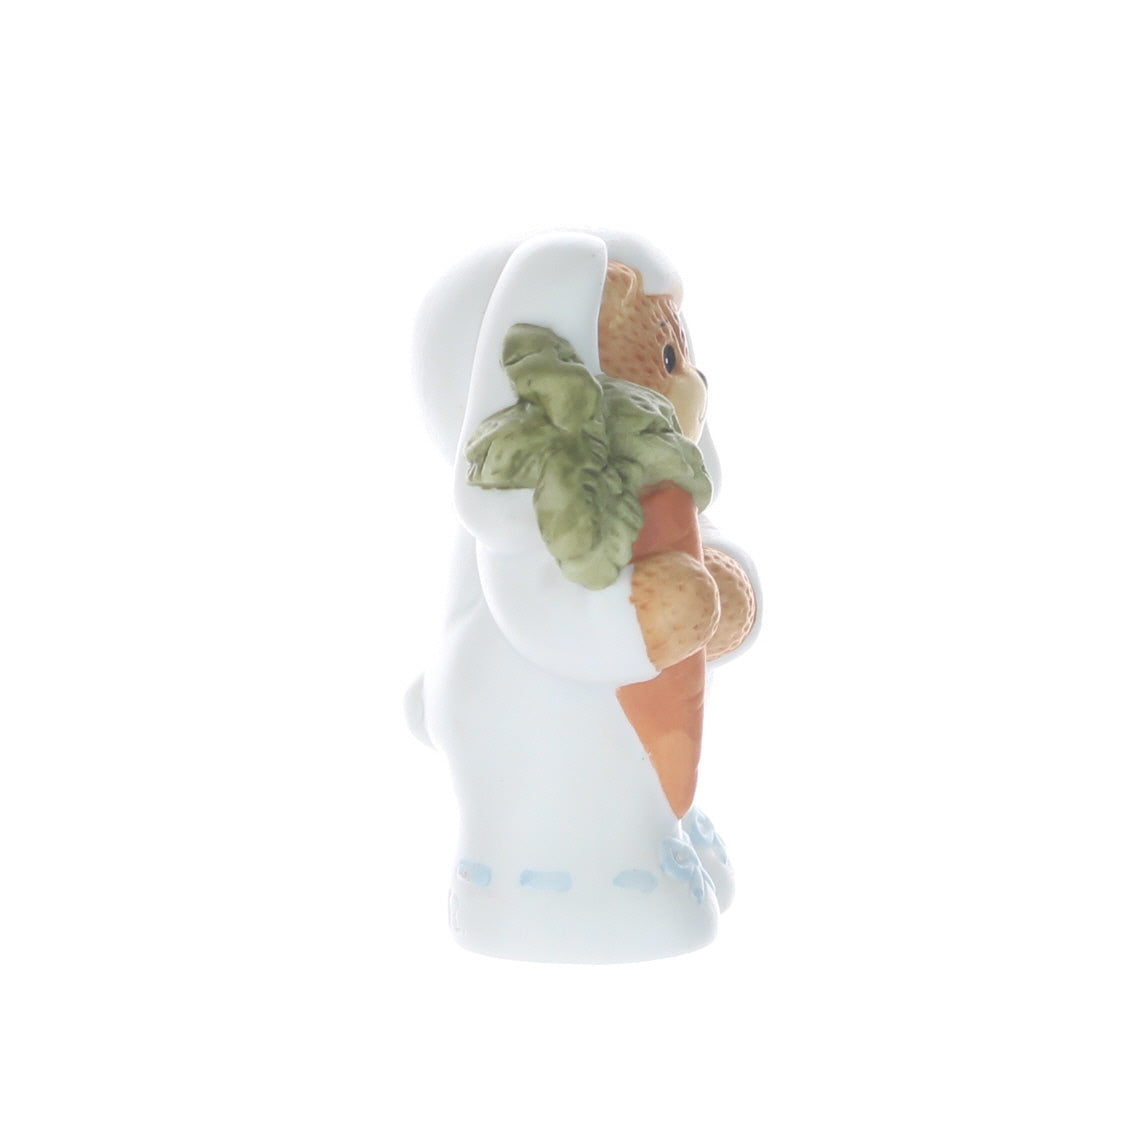 Lucy-and-Me-Porcelain-Figurine-Easter-Bunny-with-Carrot